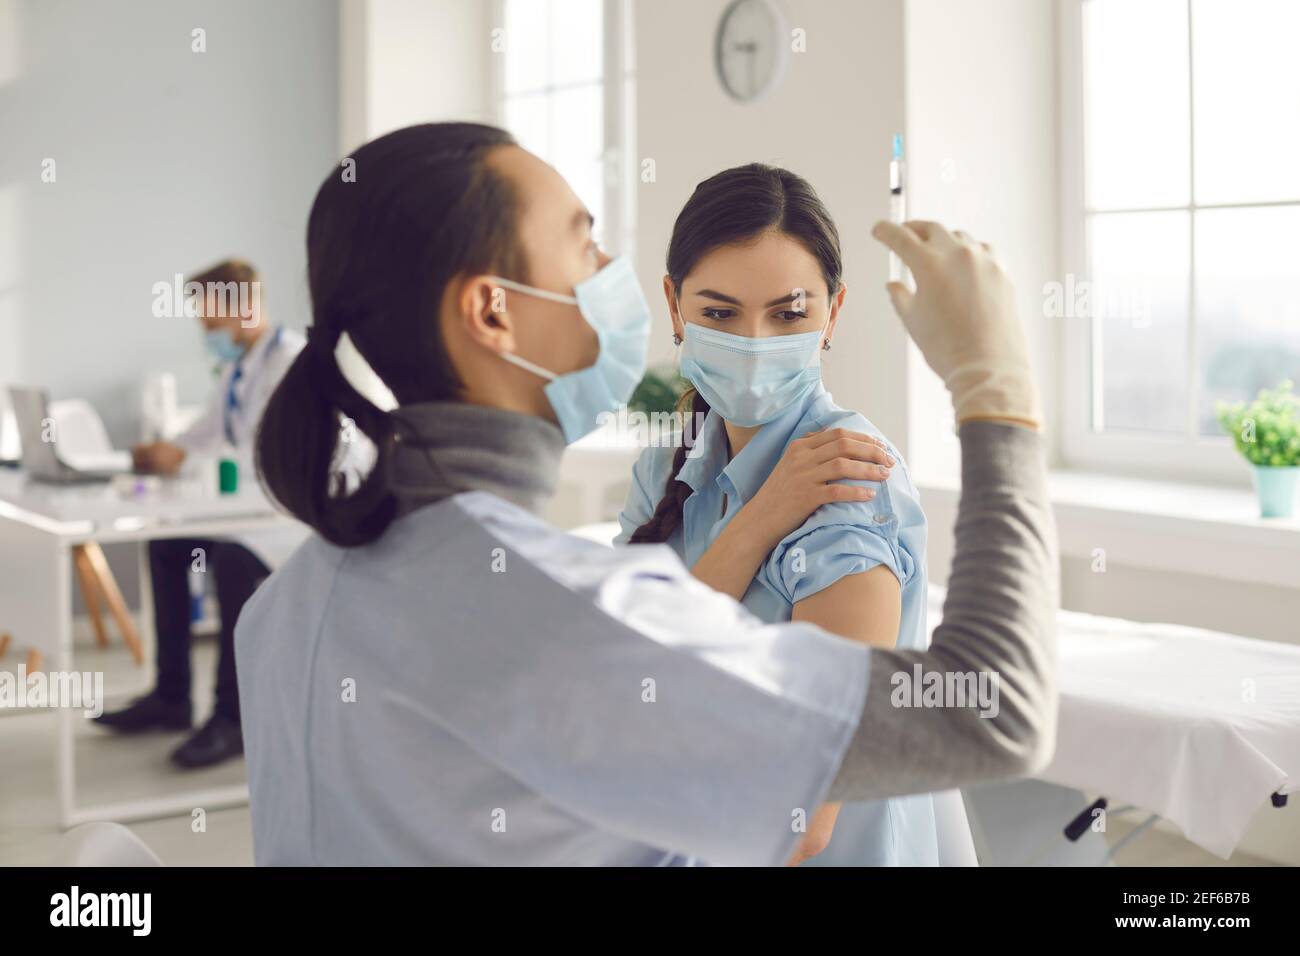 Young woman in medical face mask getting Covid-19 clinical trial vaccine at hospital Stock Photo